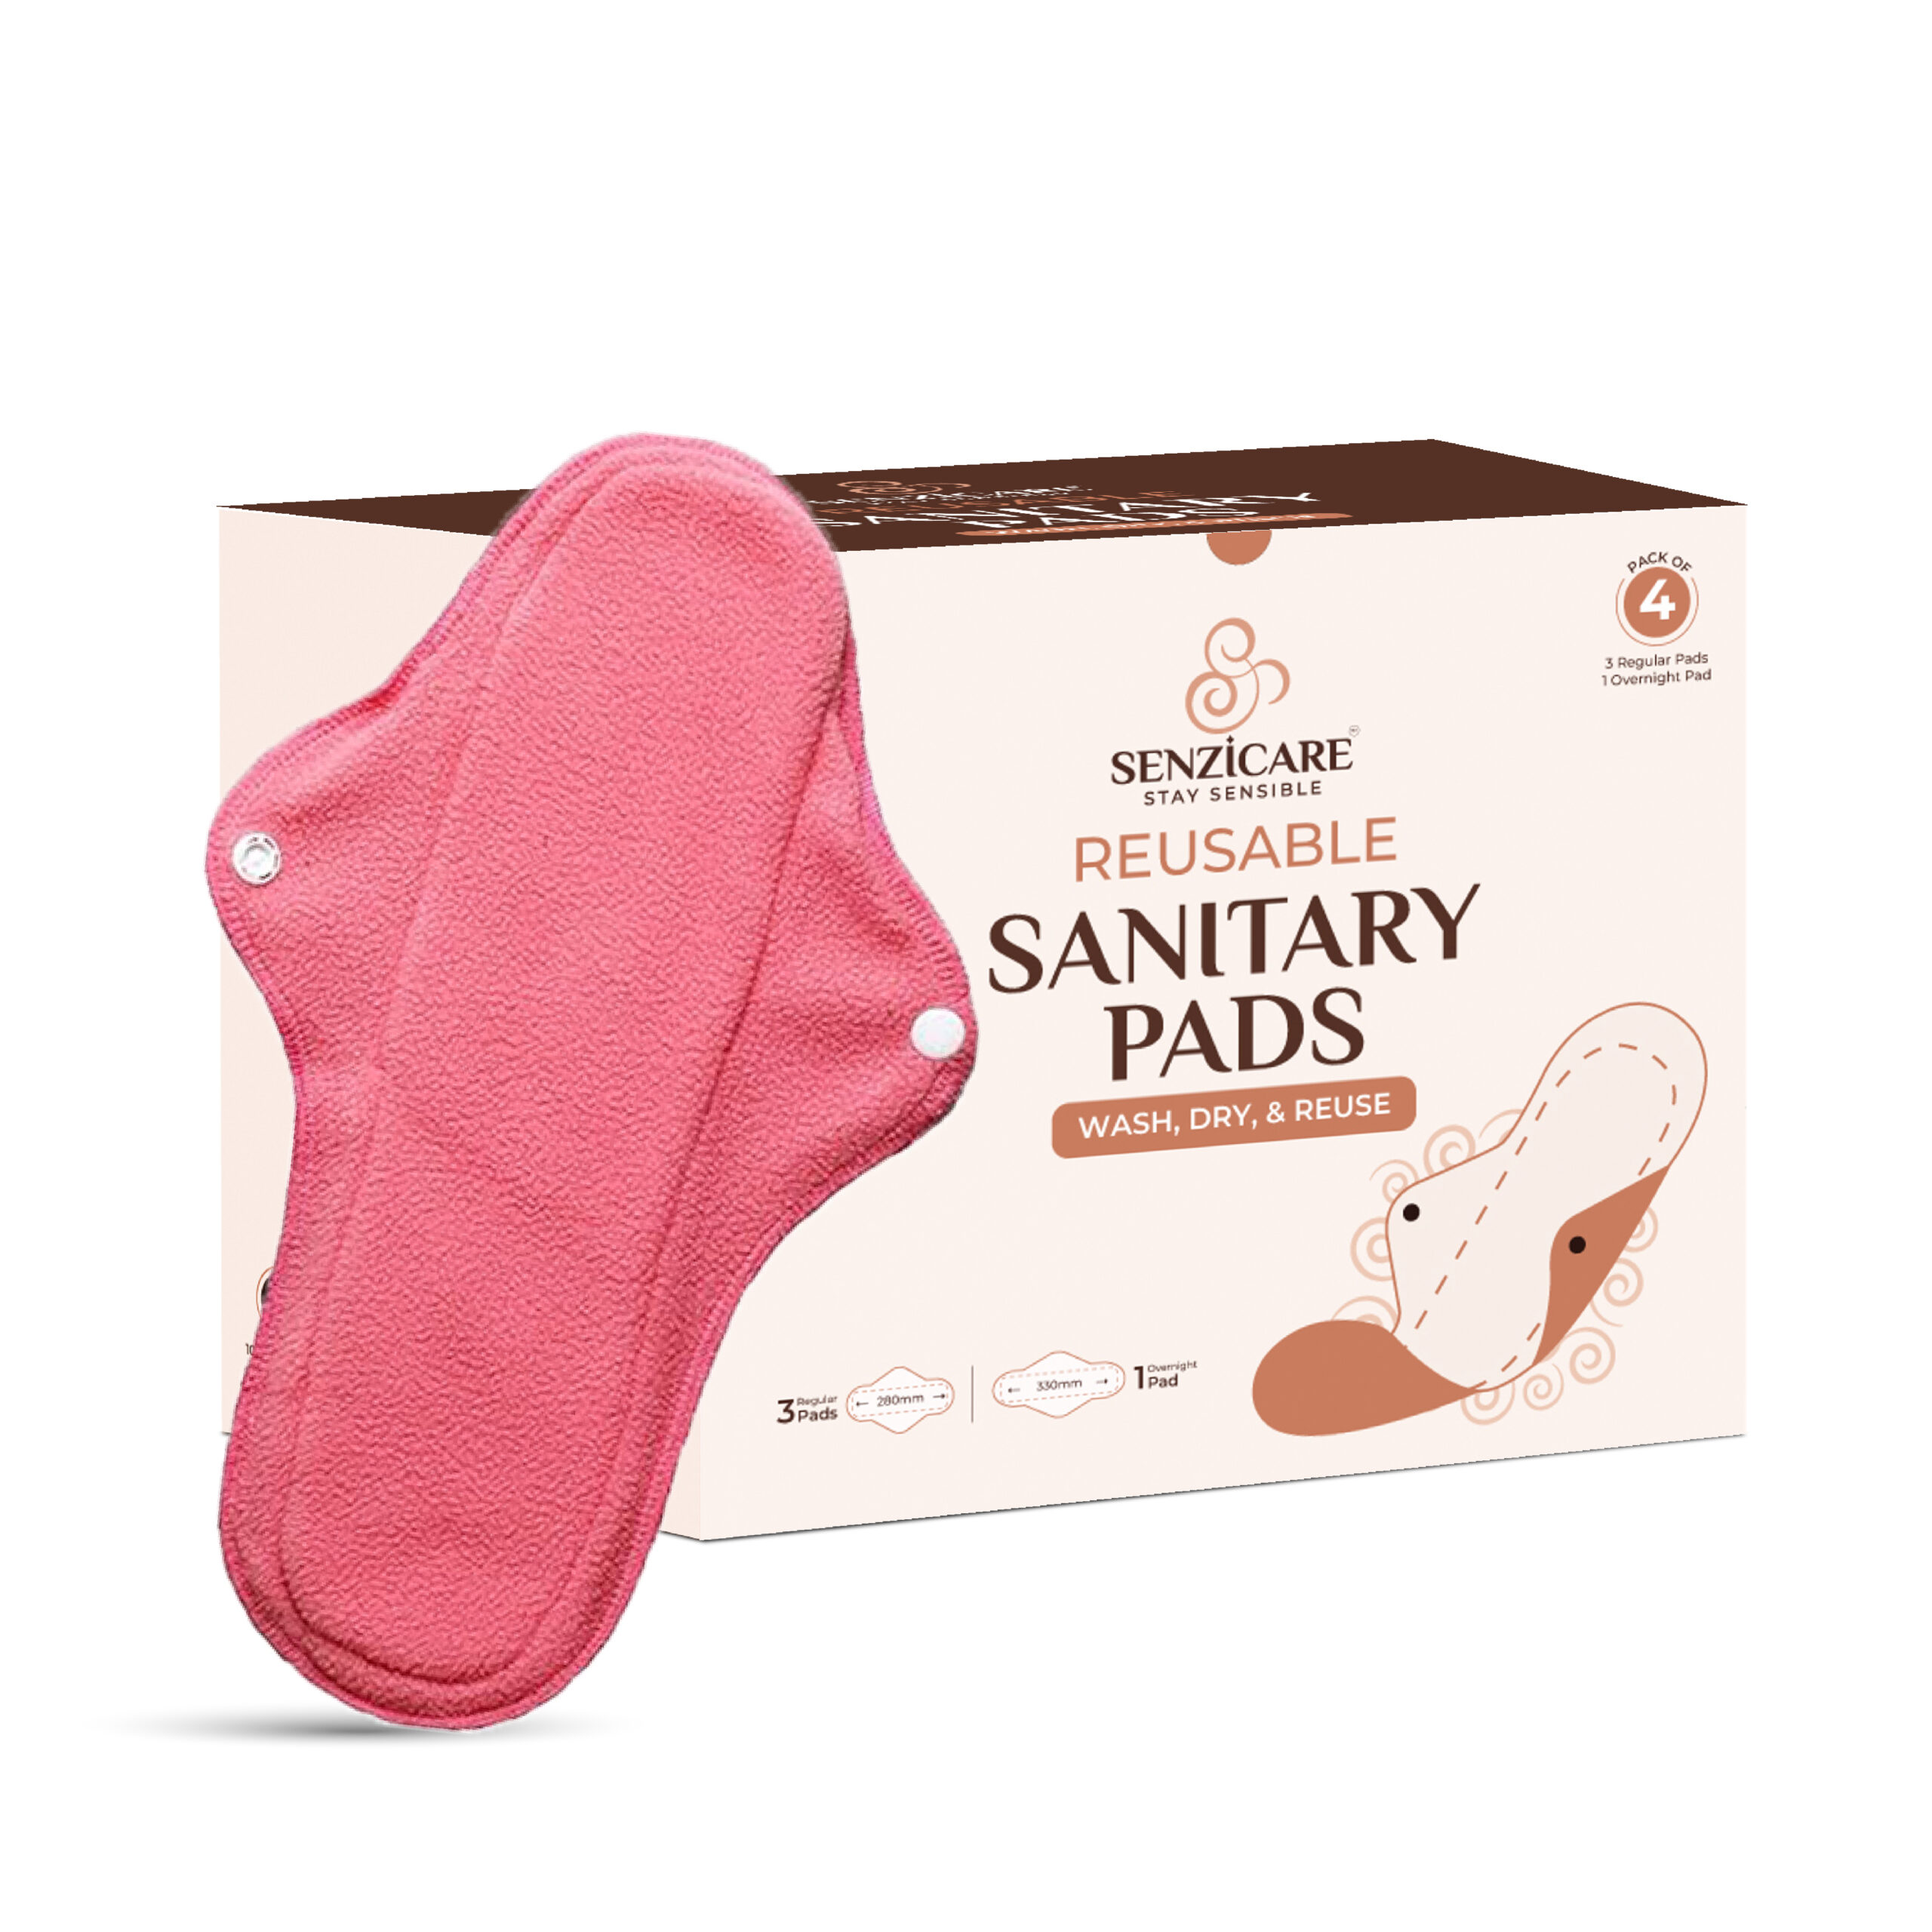 Senzicare Reusable Washable Sanitary Cloth Pads for Women, Anti-Bacterial, Superb Absorbency, Lasts Up To 100 Washes, Skin Friendly